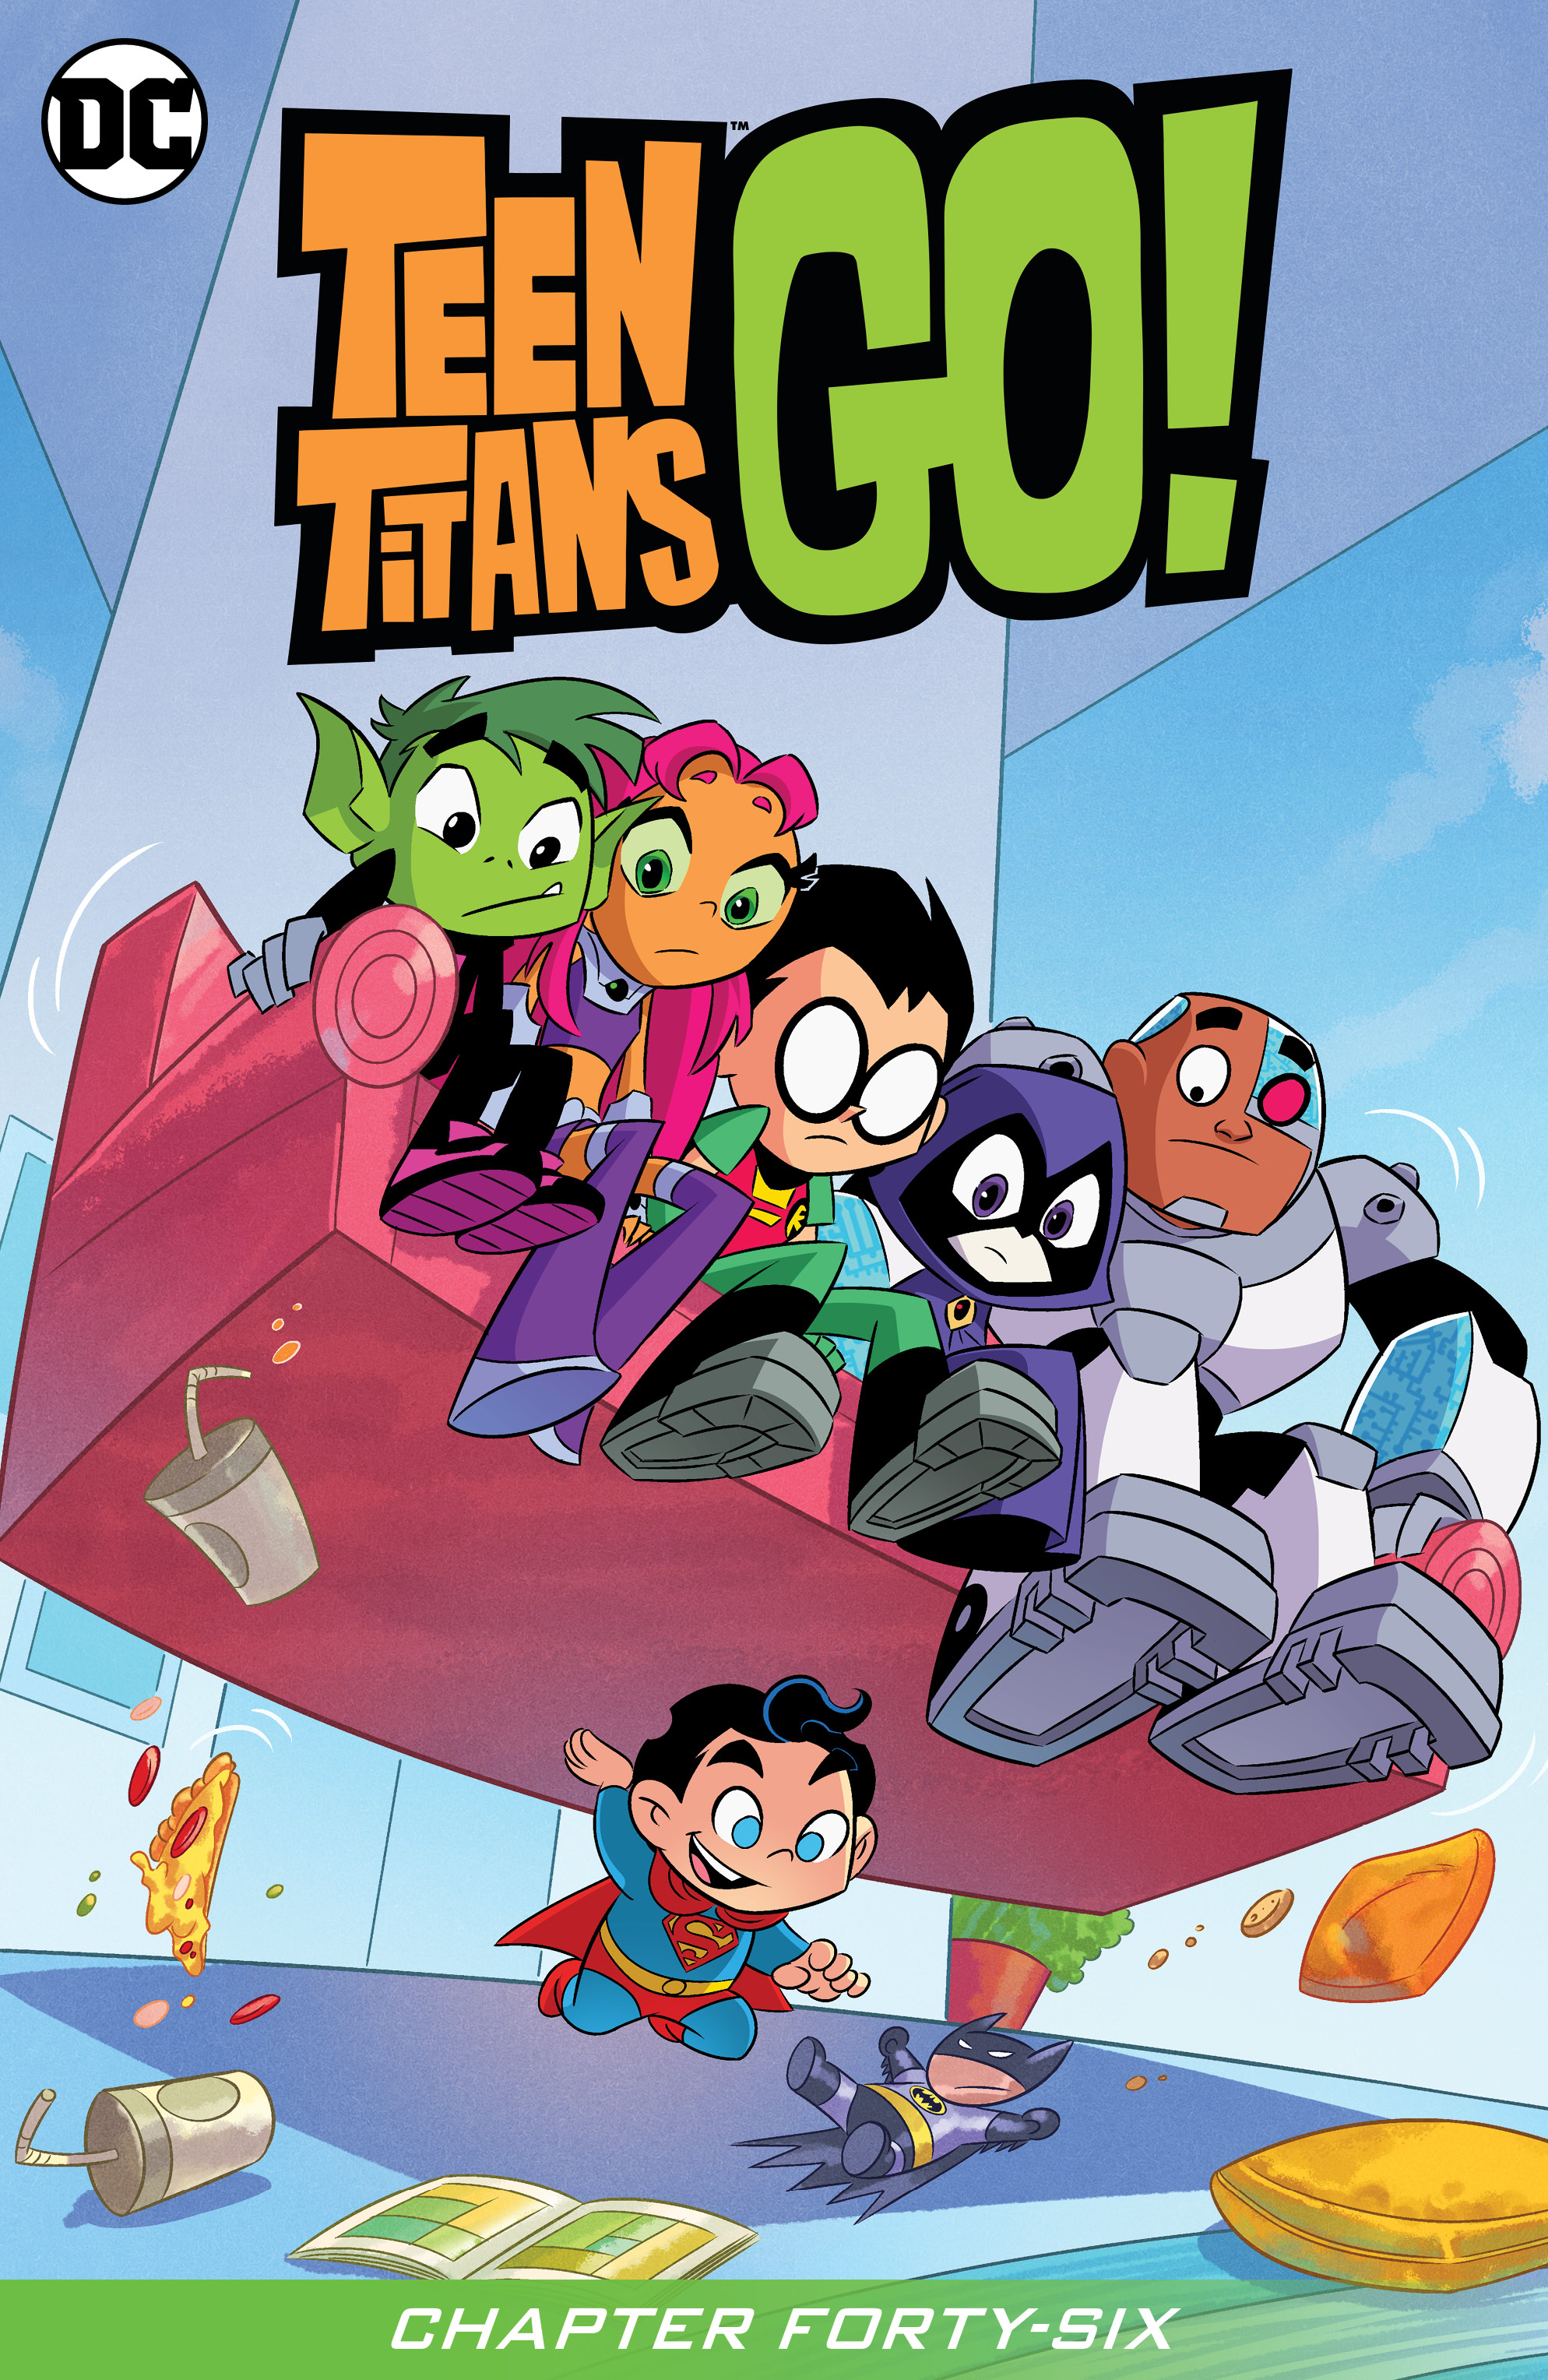 Teen Titans Go! (2013-) #46 preview images